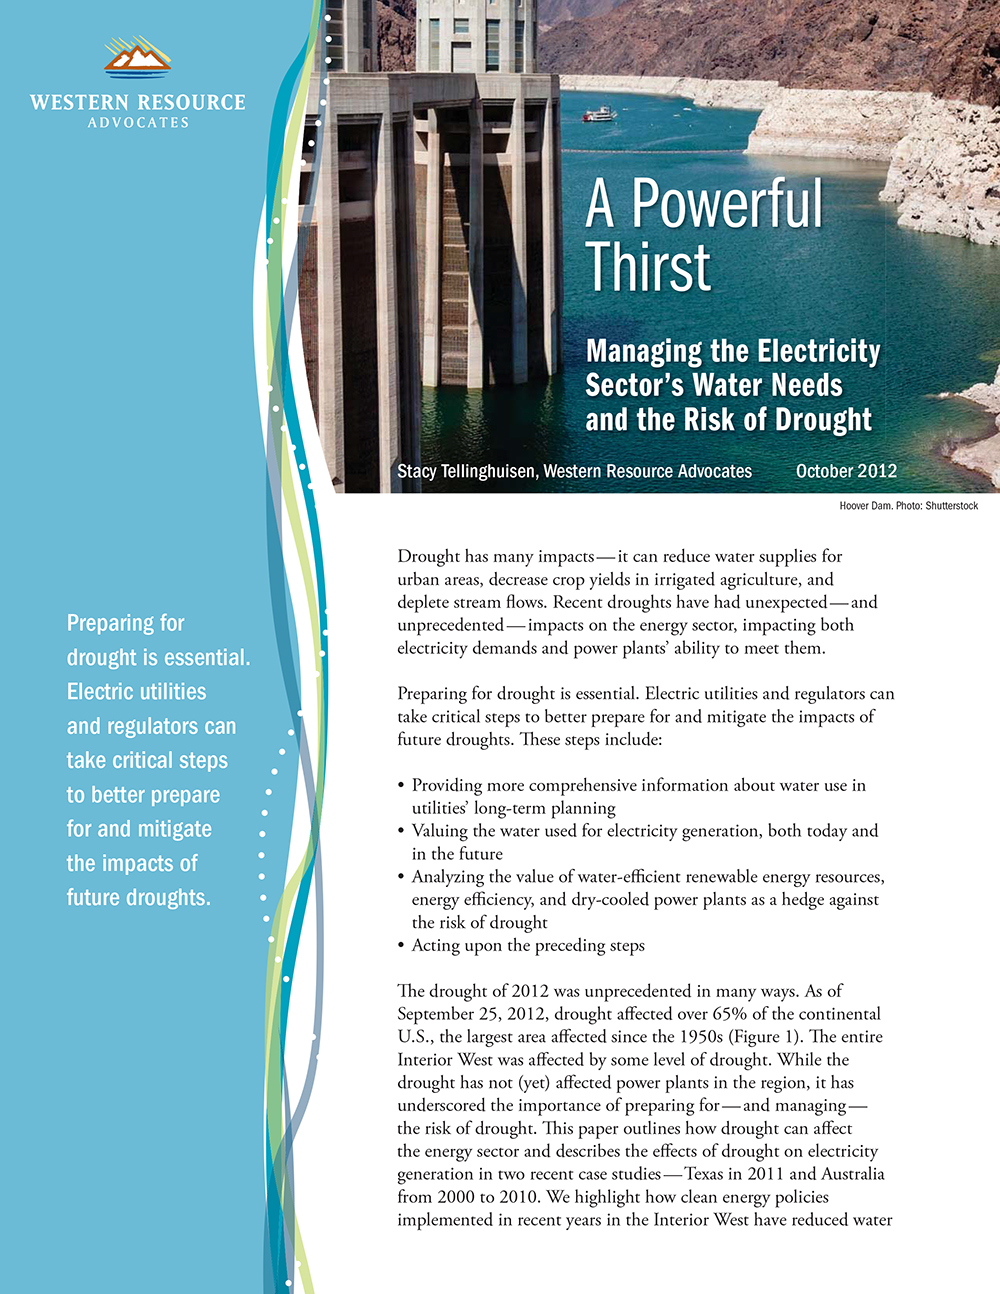 A Powerful Thirst: Managing the Electricity Sector’s Water Needs and the Risk of Drought